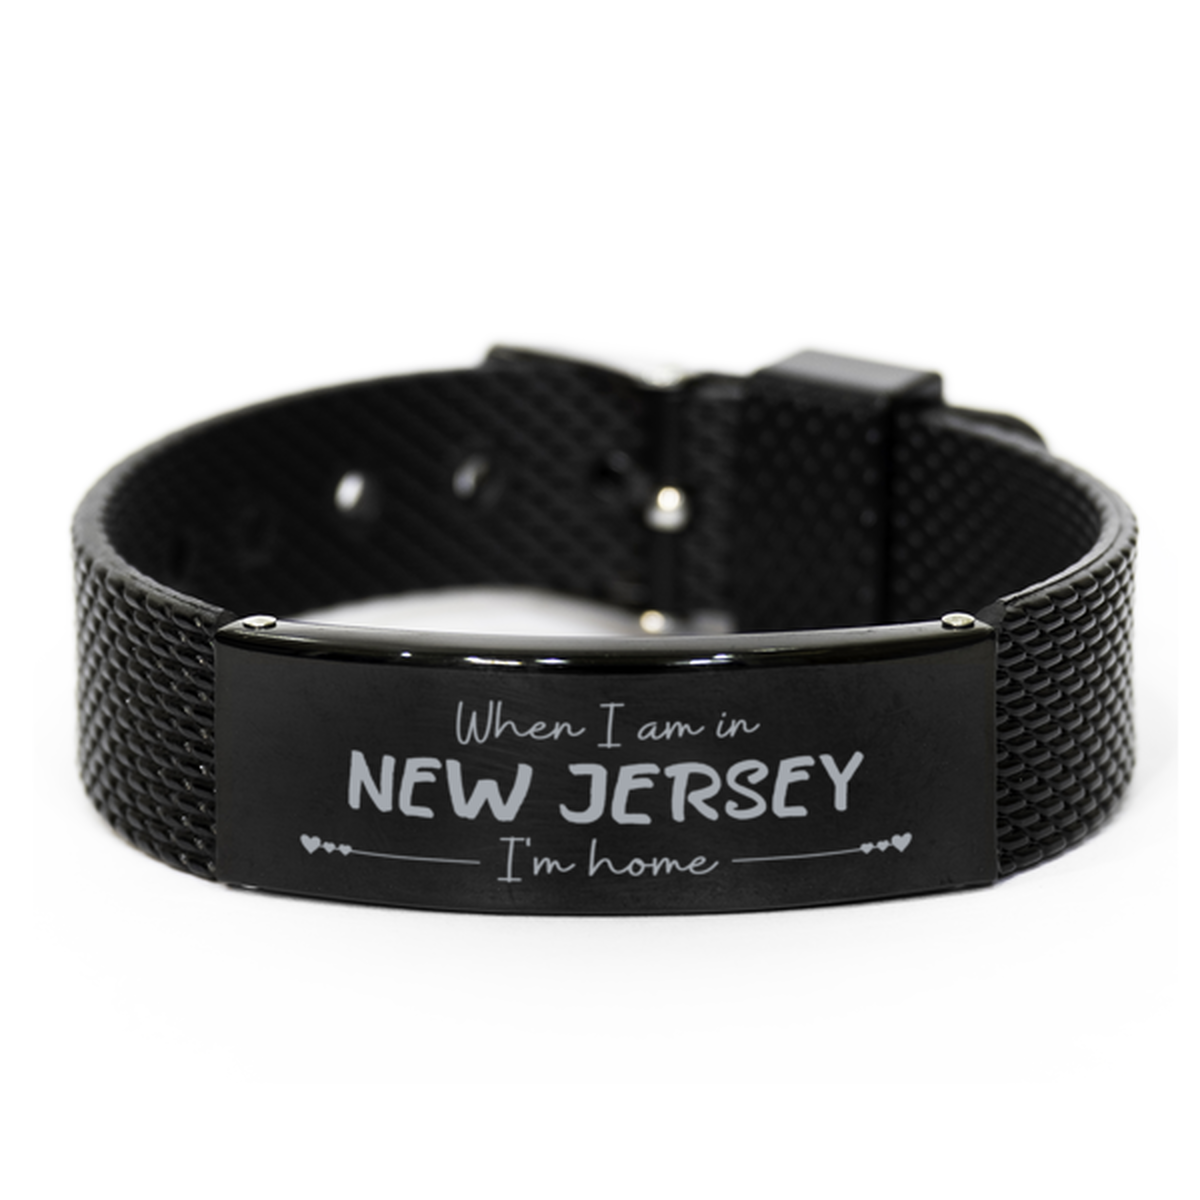 When I am in New Jersey I'm home Black Shark Mesh Bracelet, Cheap Gifts For New Jersey, State New Jersey Birthday Gifts for Friends Coworker